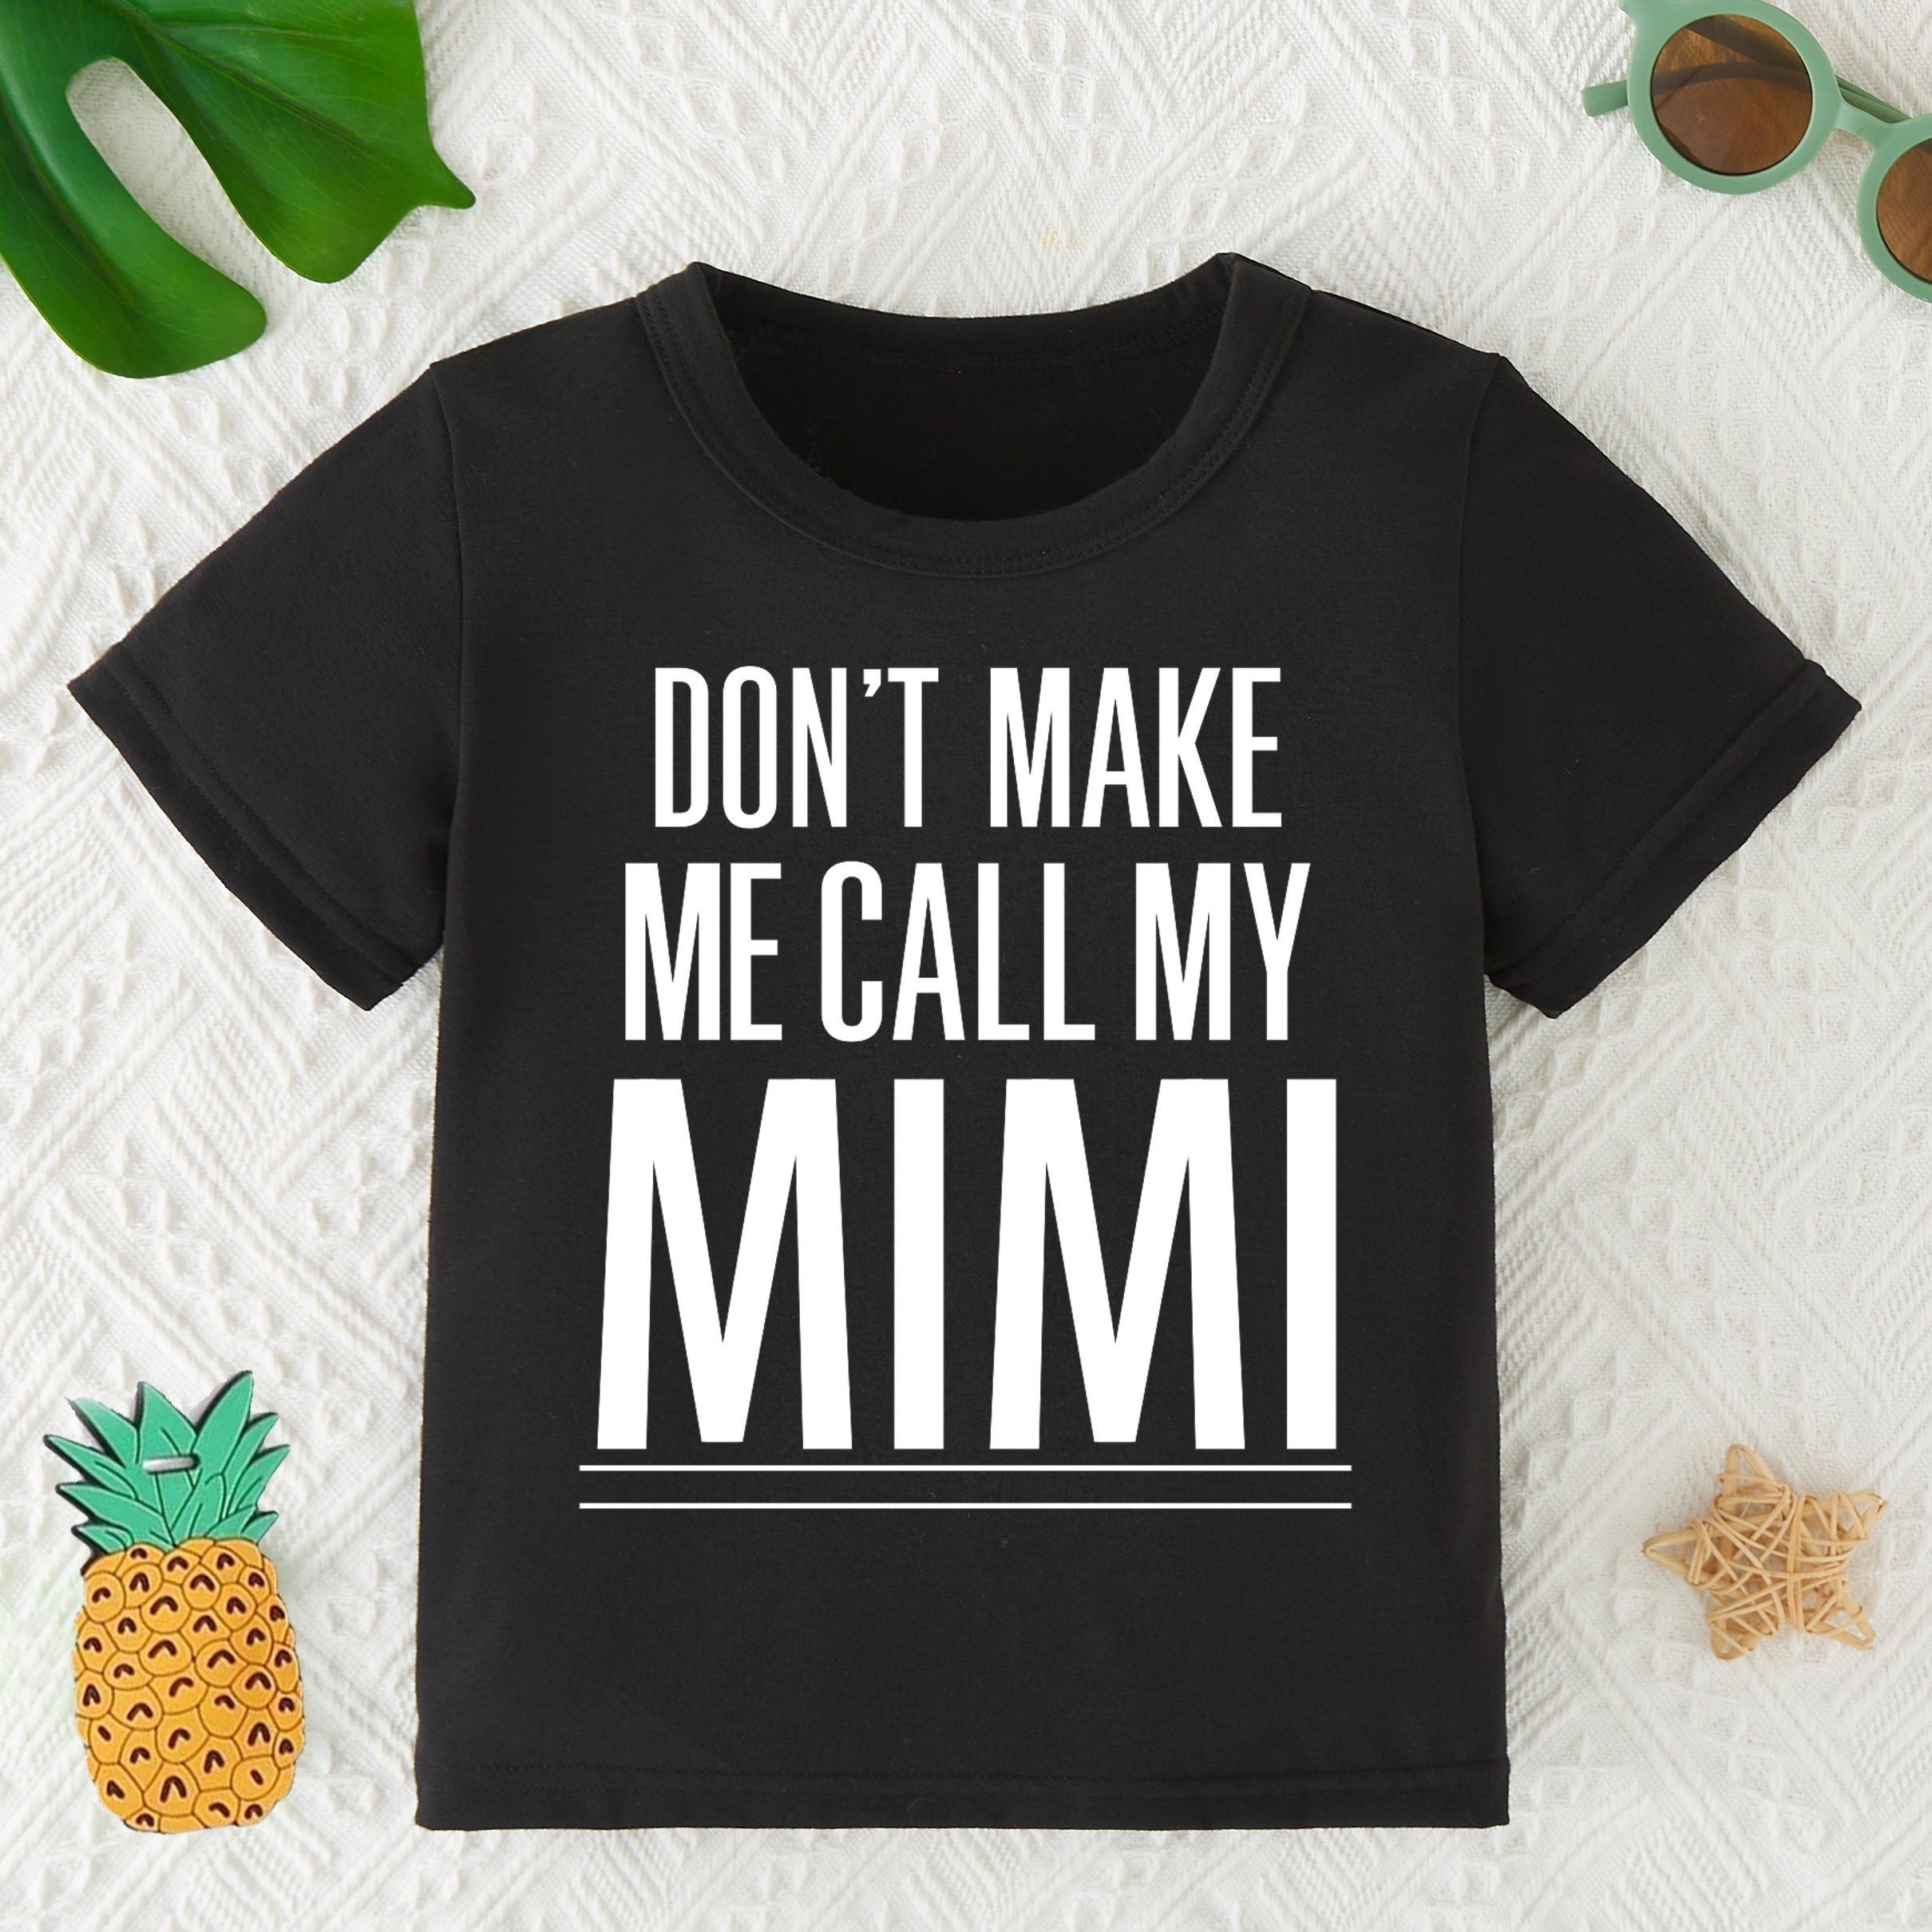 

" Don't Make Me Call My Mimi " New Letter Printed Children's Round Neck Short-sleeved T-shirt, Casual Cute Boys And Girls Children's T-shirt